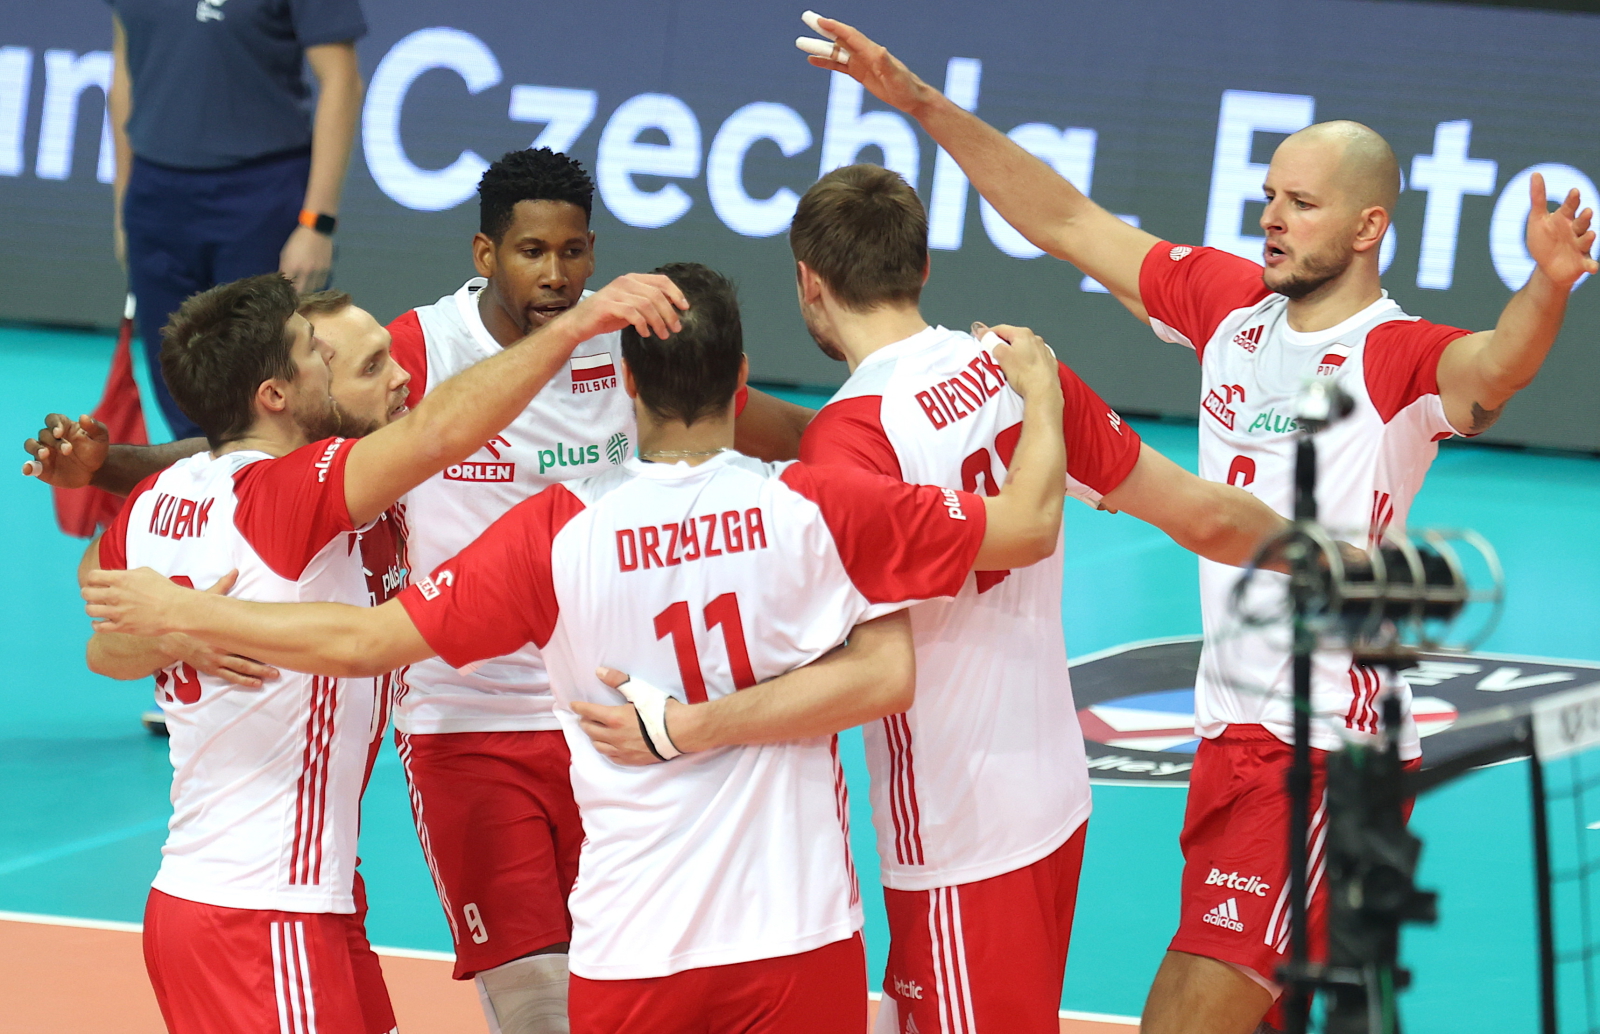 Poland players celebrate after defeating Serbia and winning the bronze at the 2021 Mens European Volleyball Championship in Katowice, southern Poland, on Sunday, September 19, 2021.